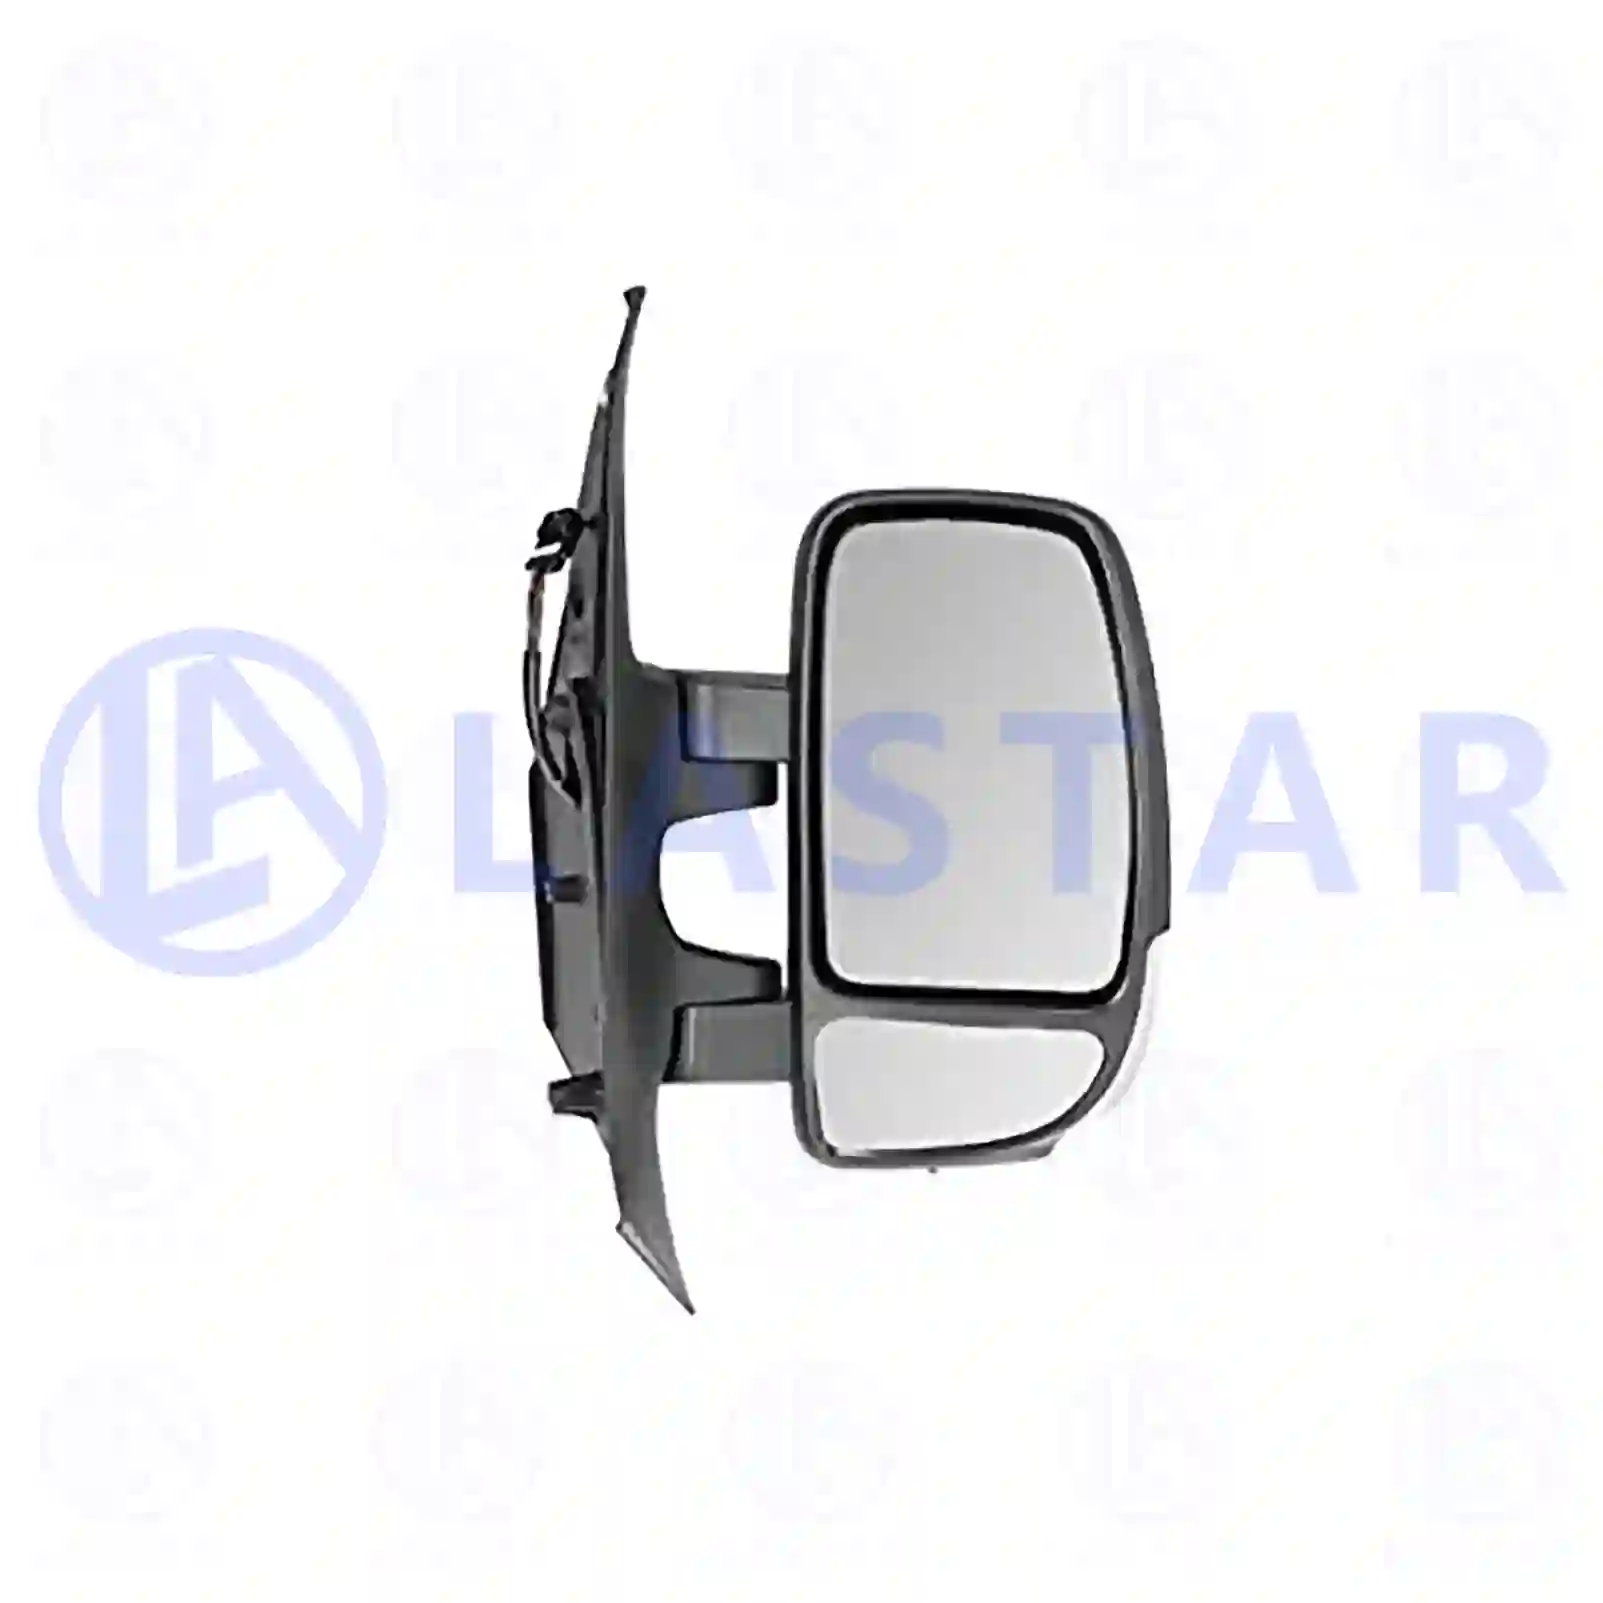 Main mirror, complete, right, 77720452, 93197490, 4419412, 963016903R ||  77720452 Lastar Spare Part | Truck Spare Parts, Auotomotive Spare Parts Main mirror, complete, right, 77720452, 93197490, 4419412, 963016903R ||  77720452 Lastar Spare Part | Truck Spare Parts, Auotomotive Spare Parts